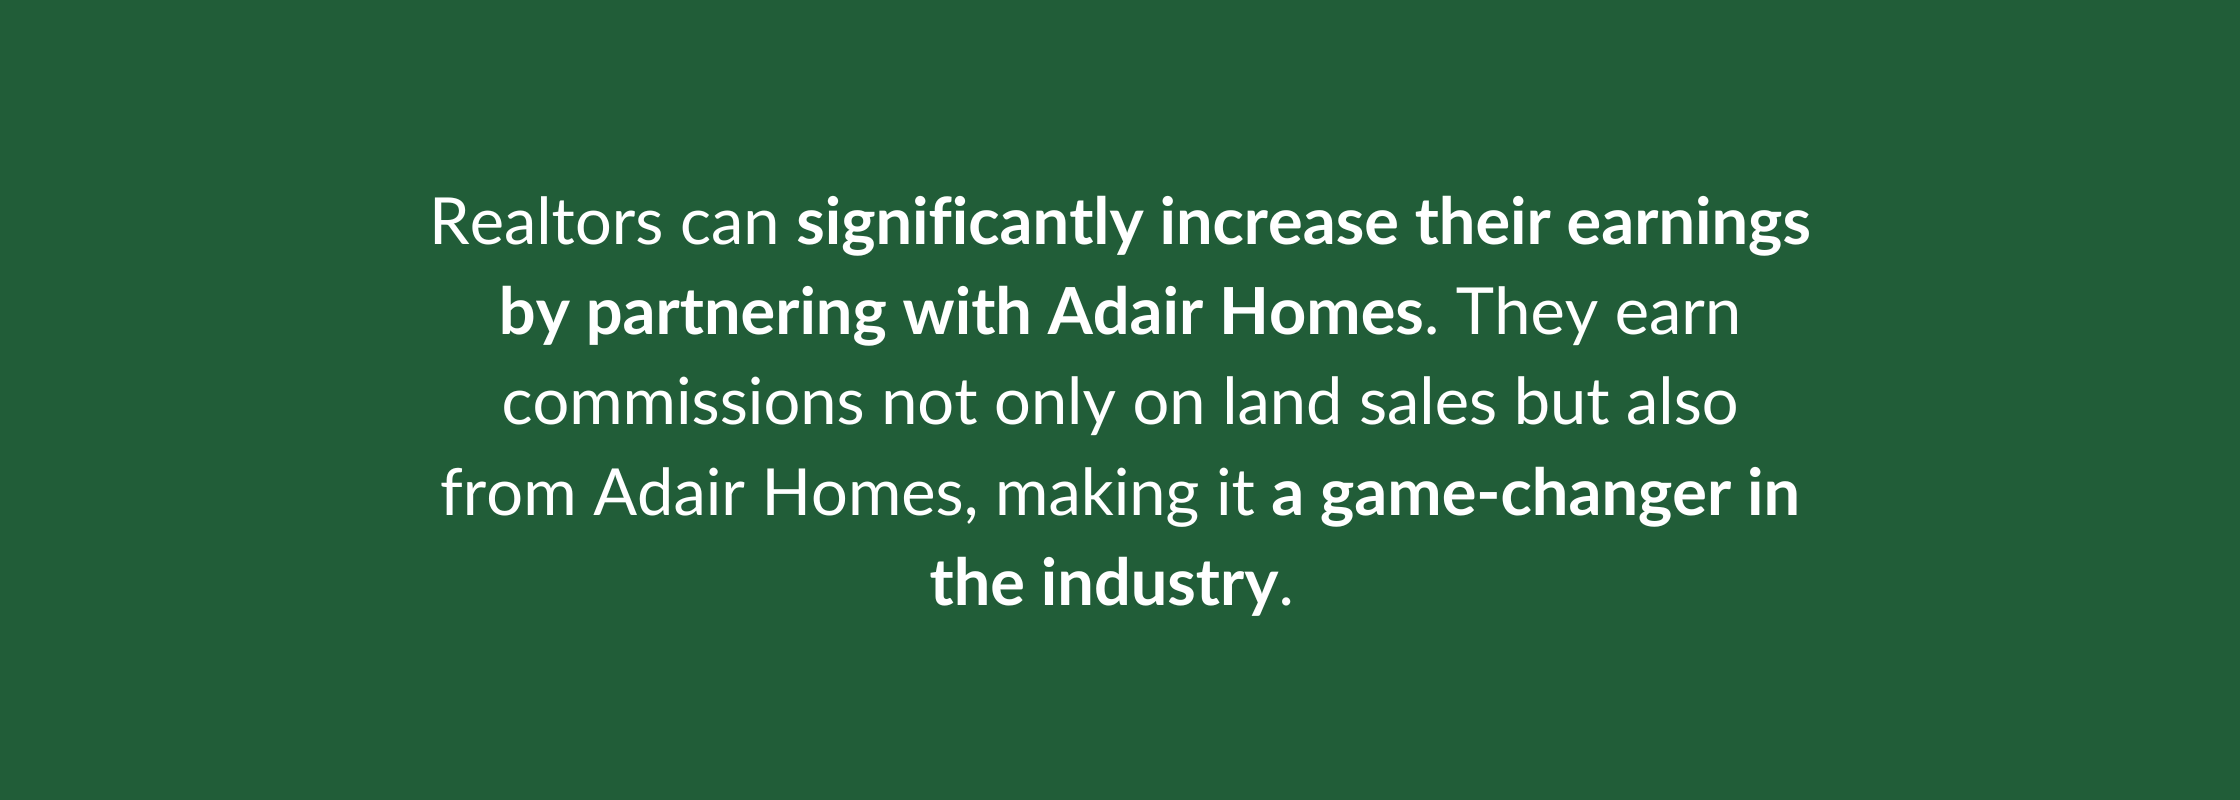 Commission Game Changer_Adair Homes_Real Estate Investment Partnership (1)